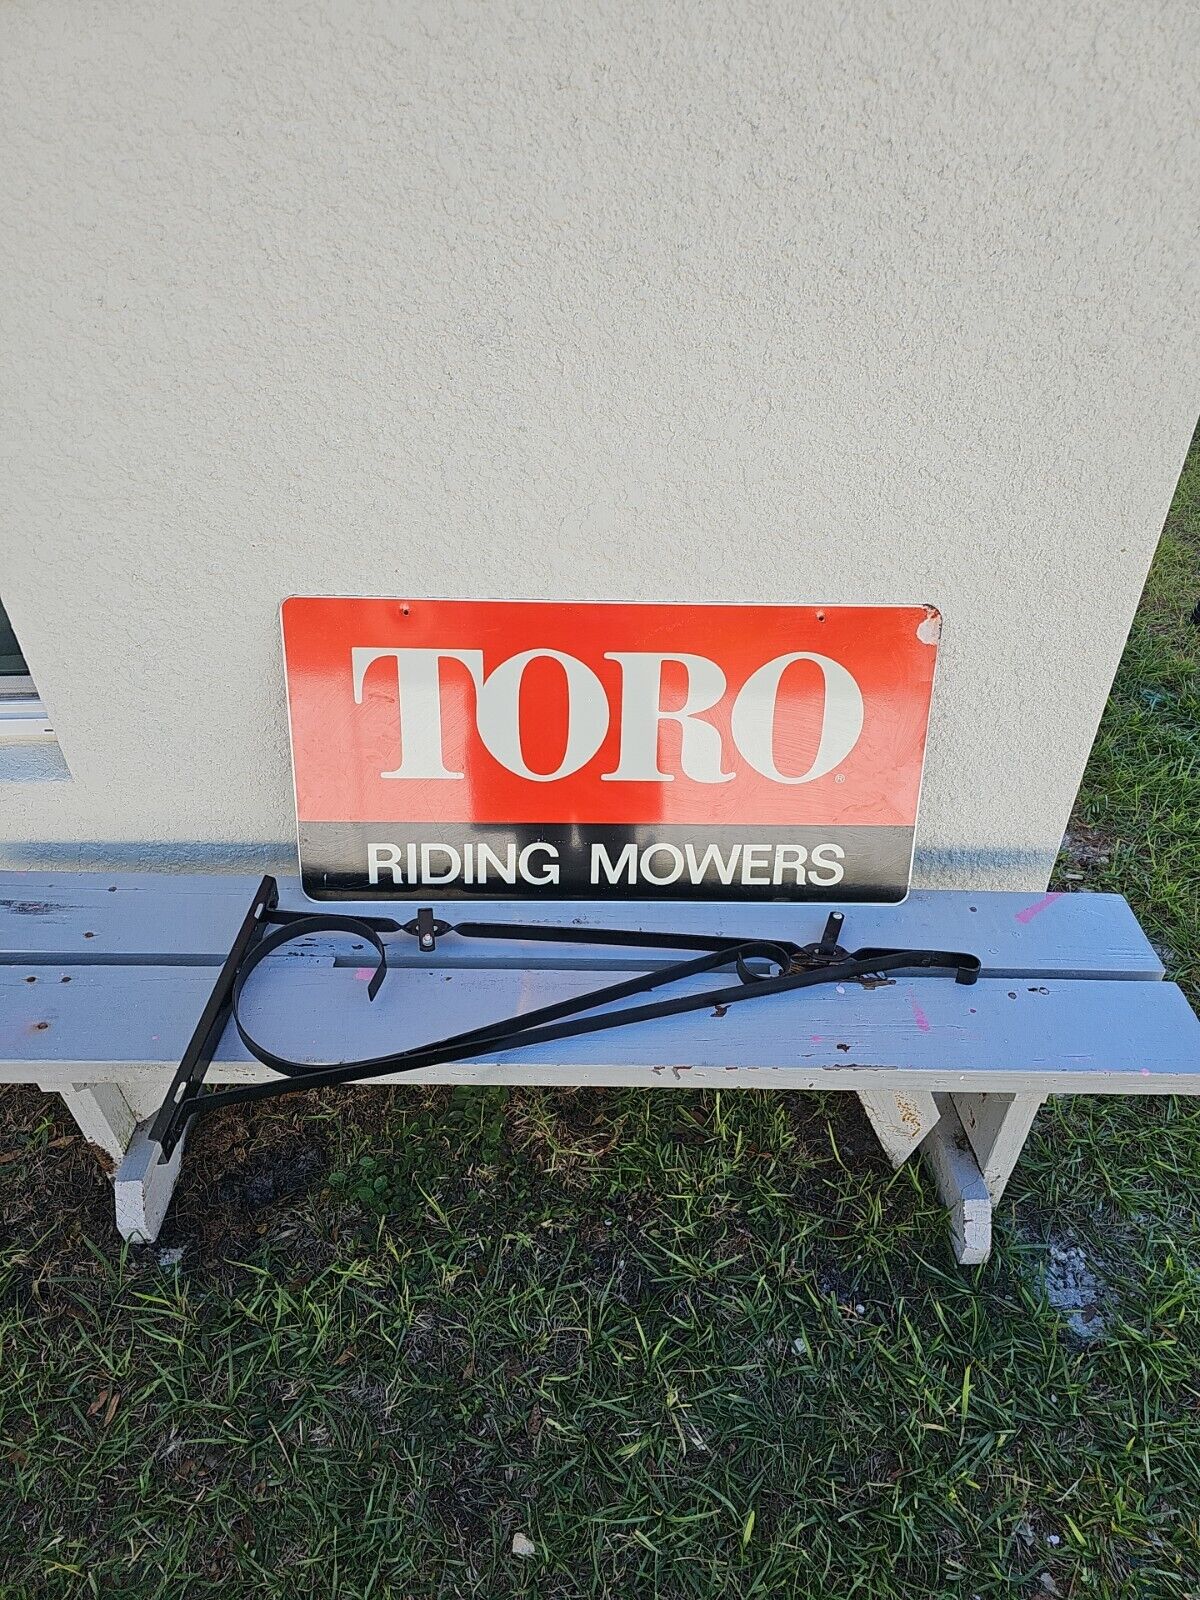 RARE Vintage Toro Riding Mowers Sign 2 Double Sided Metal 16x32” with Bracket